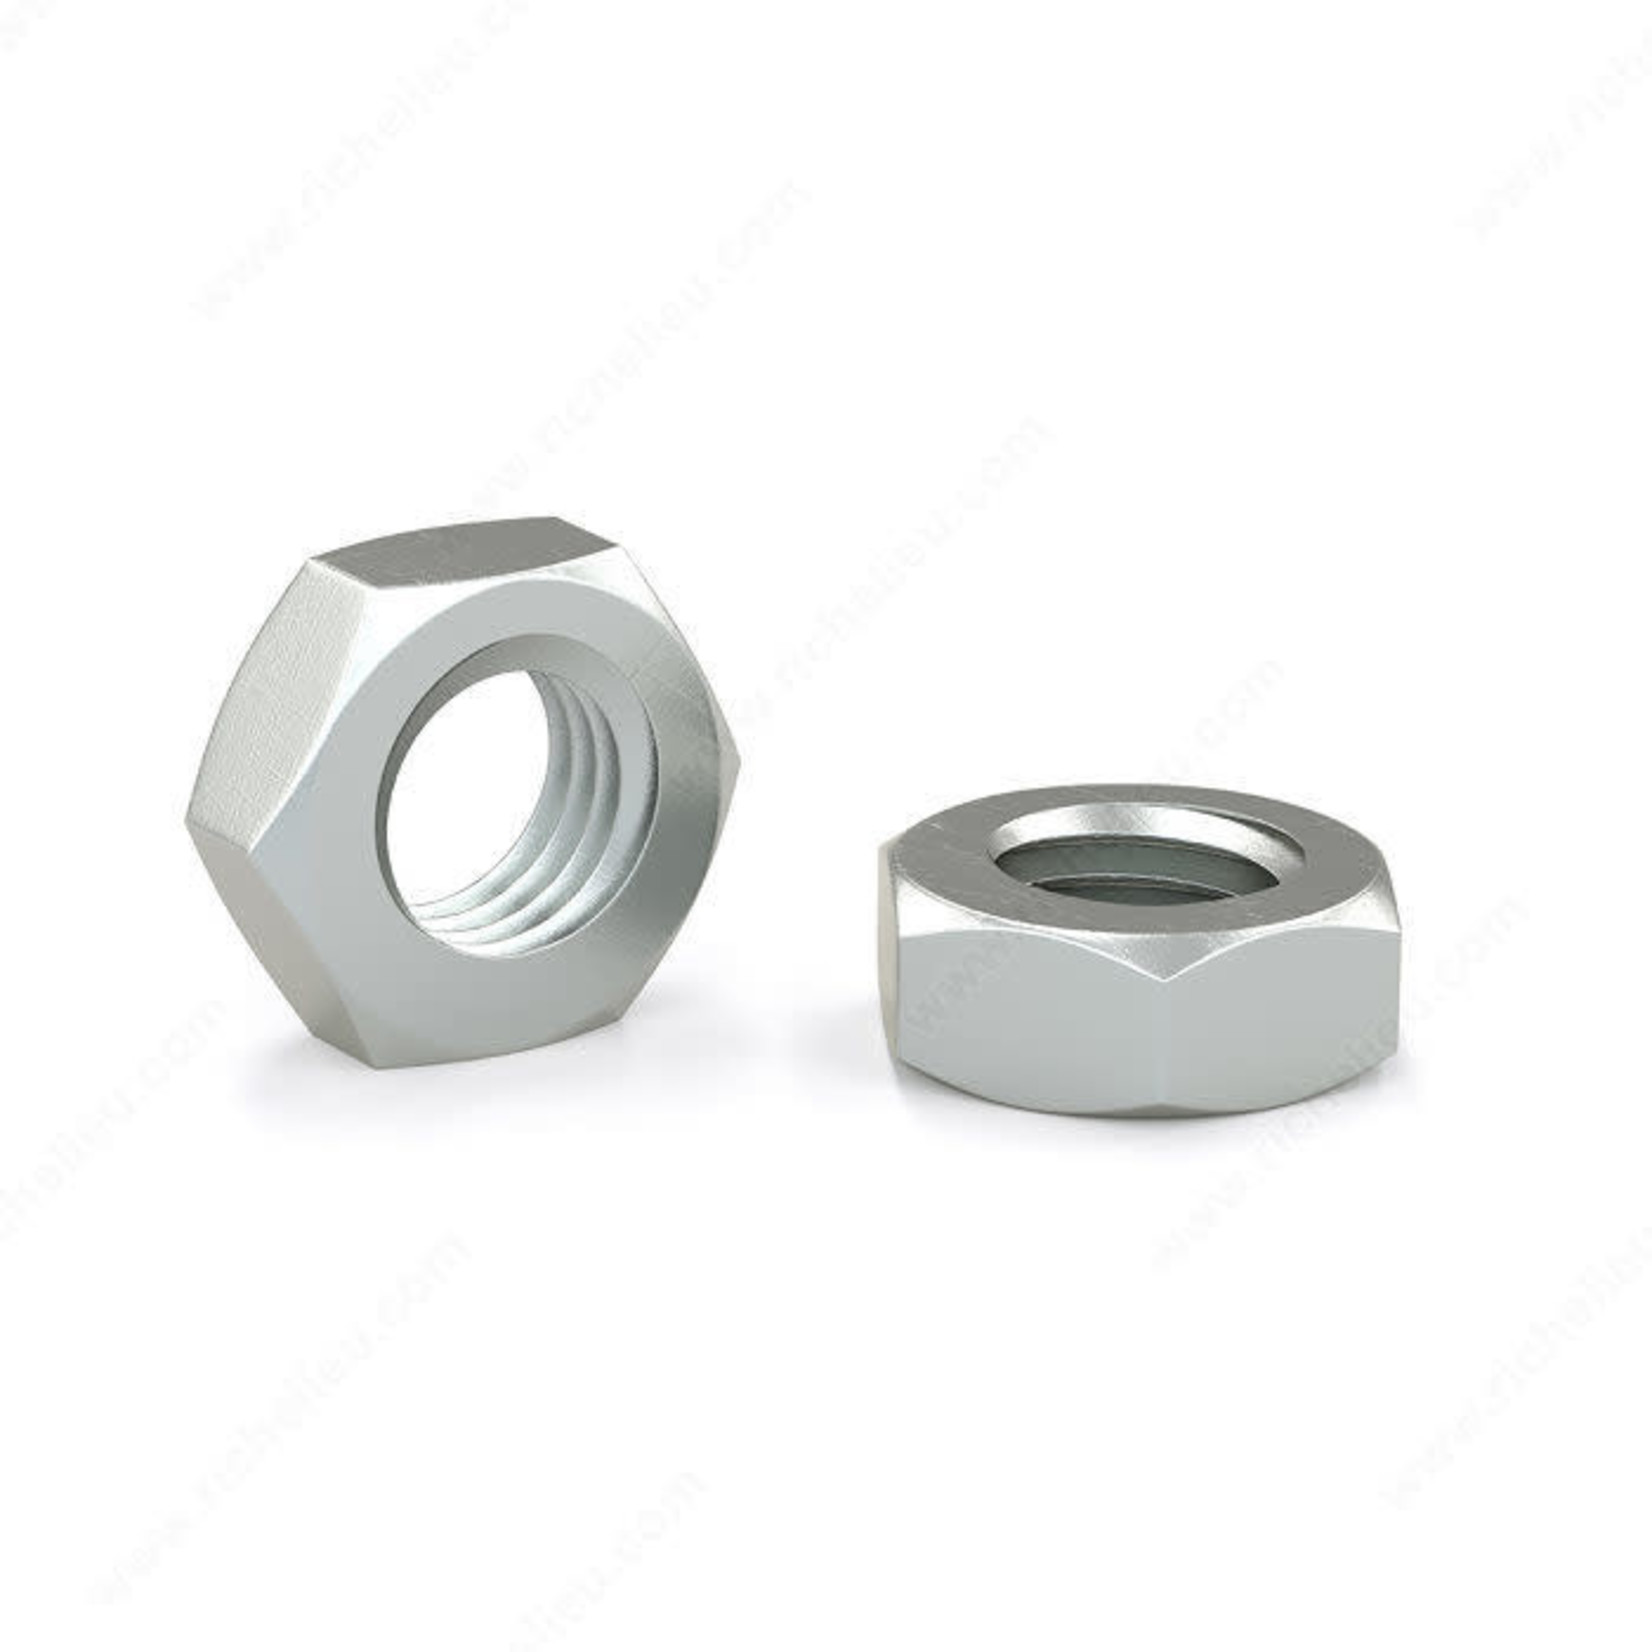 RELIABLE HEXAGON NUTS, 6-32, 18PK BLISTER